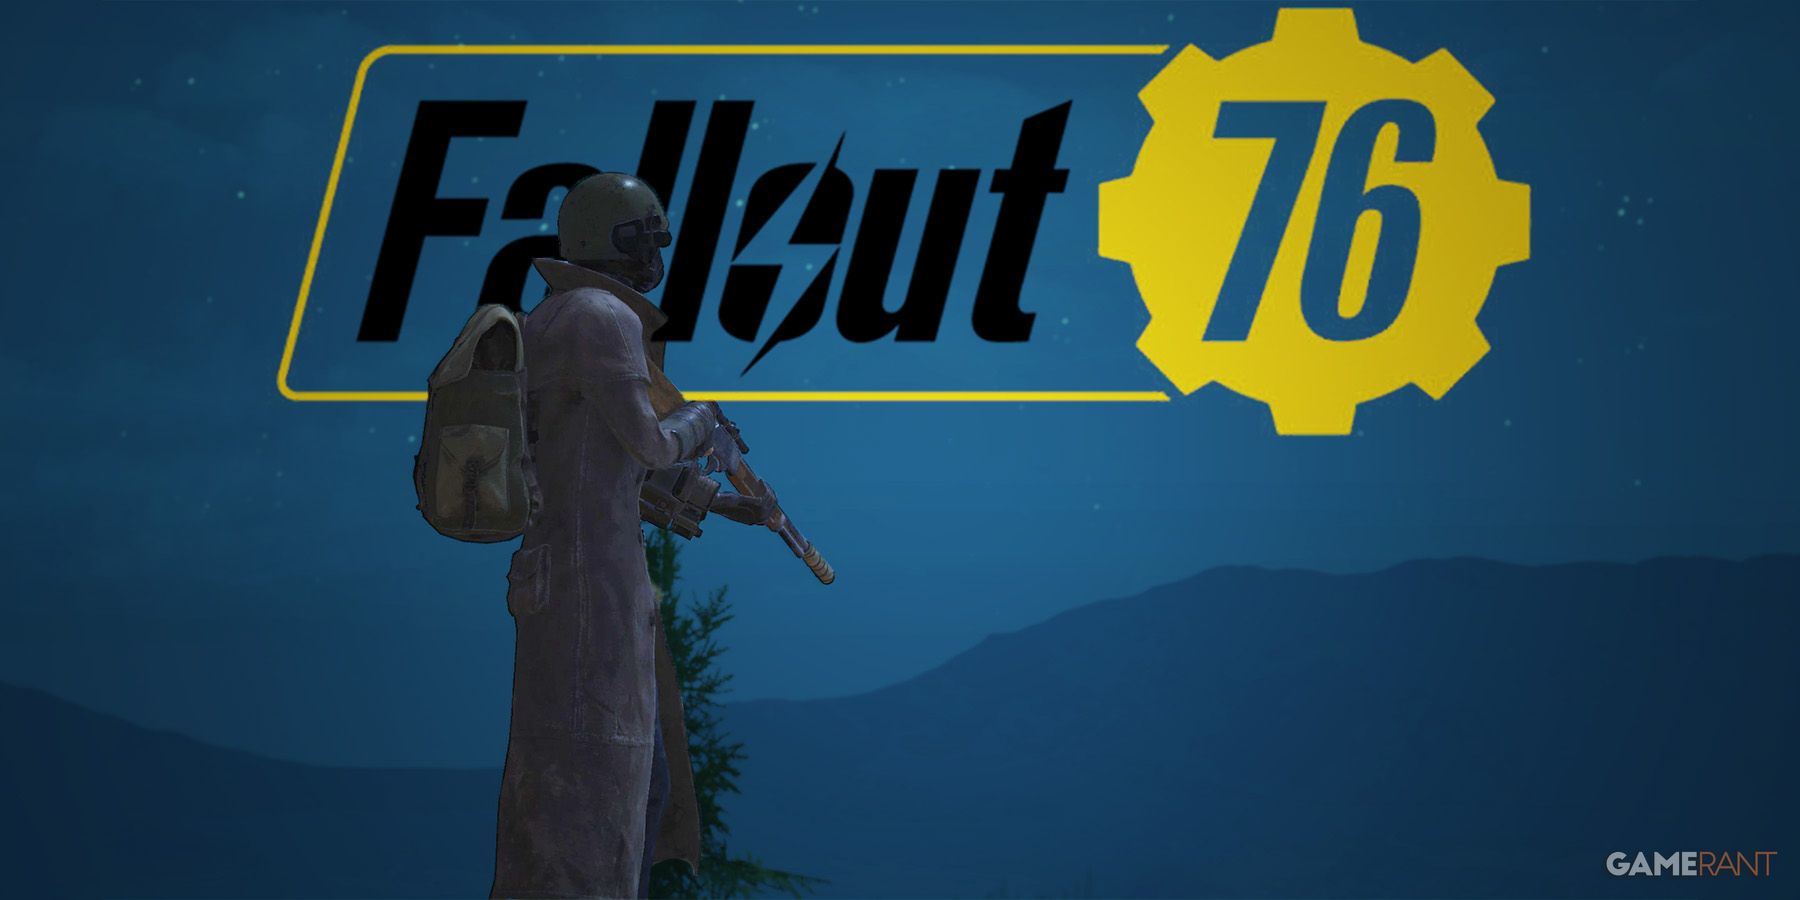 Fallout 76 First Ranger armor with lever action rifle looking at game logo in distance night sky